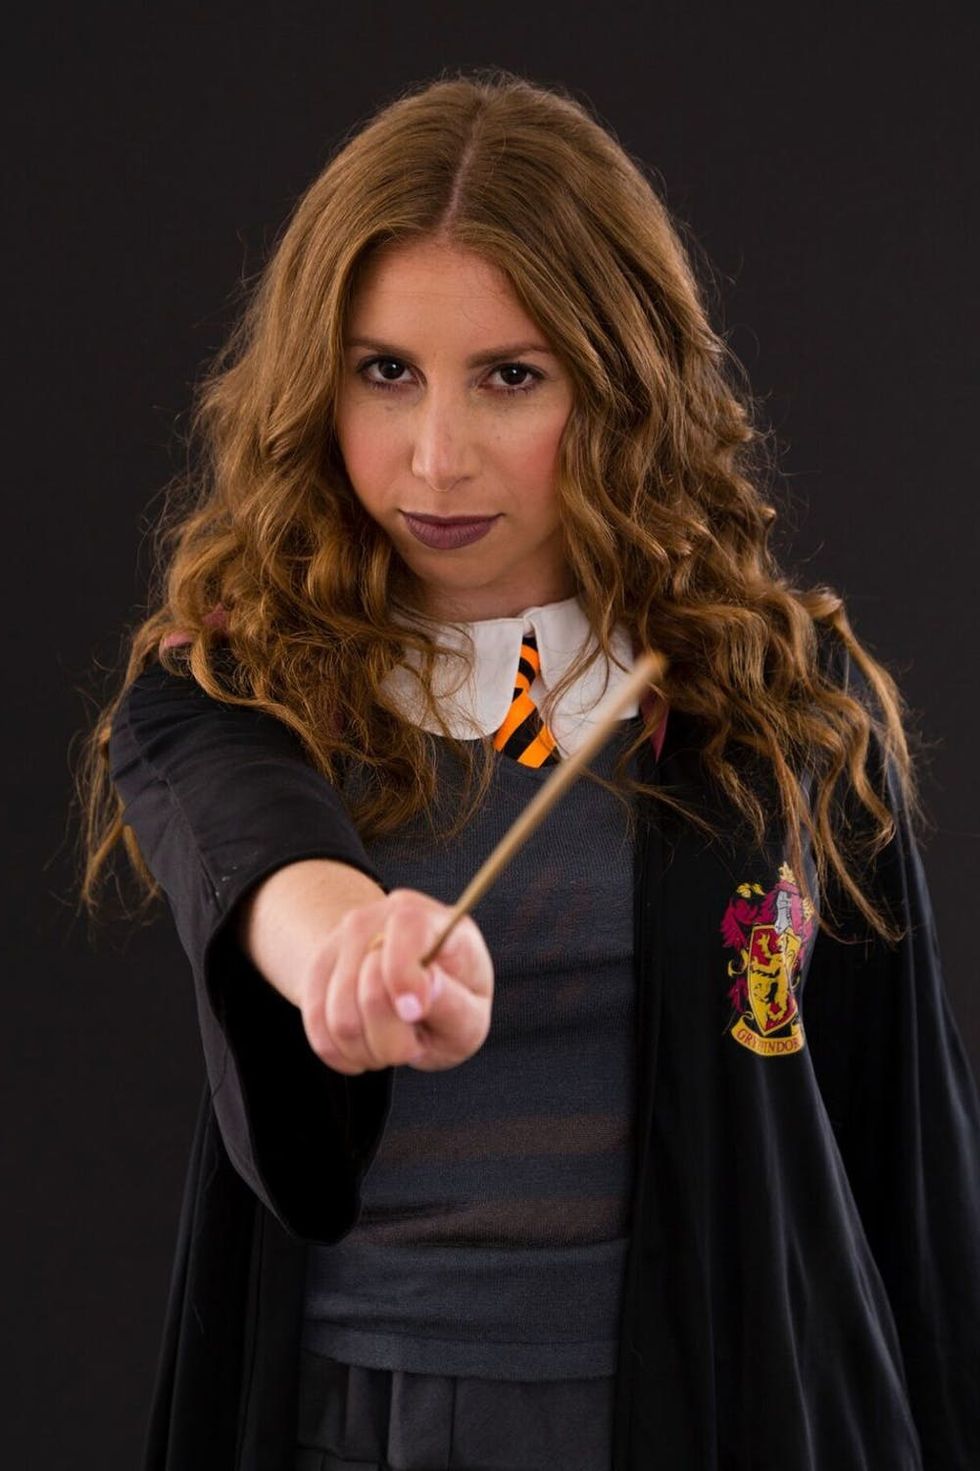 Woman dressed up as Hermione from Harry Potter for Halloween. 